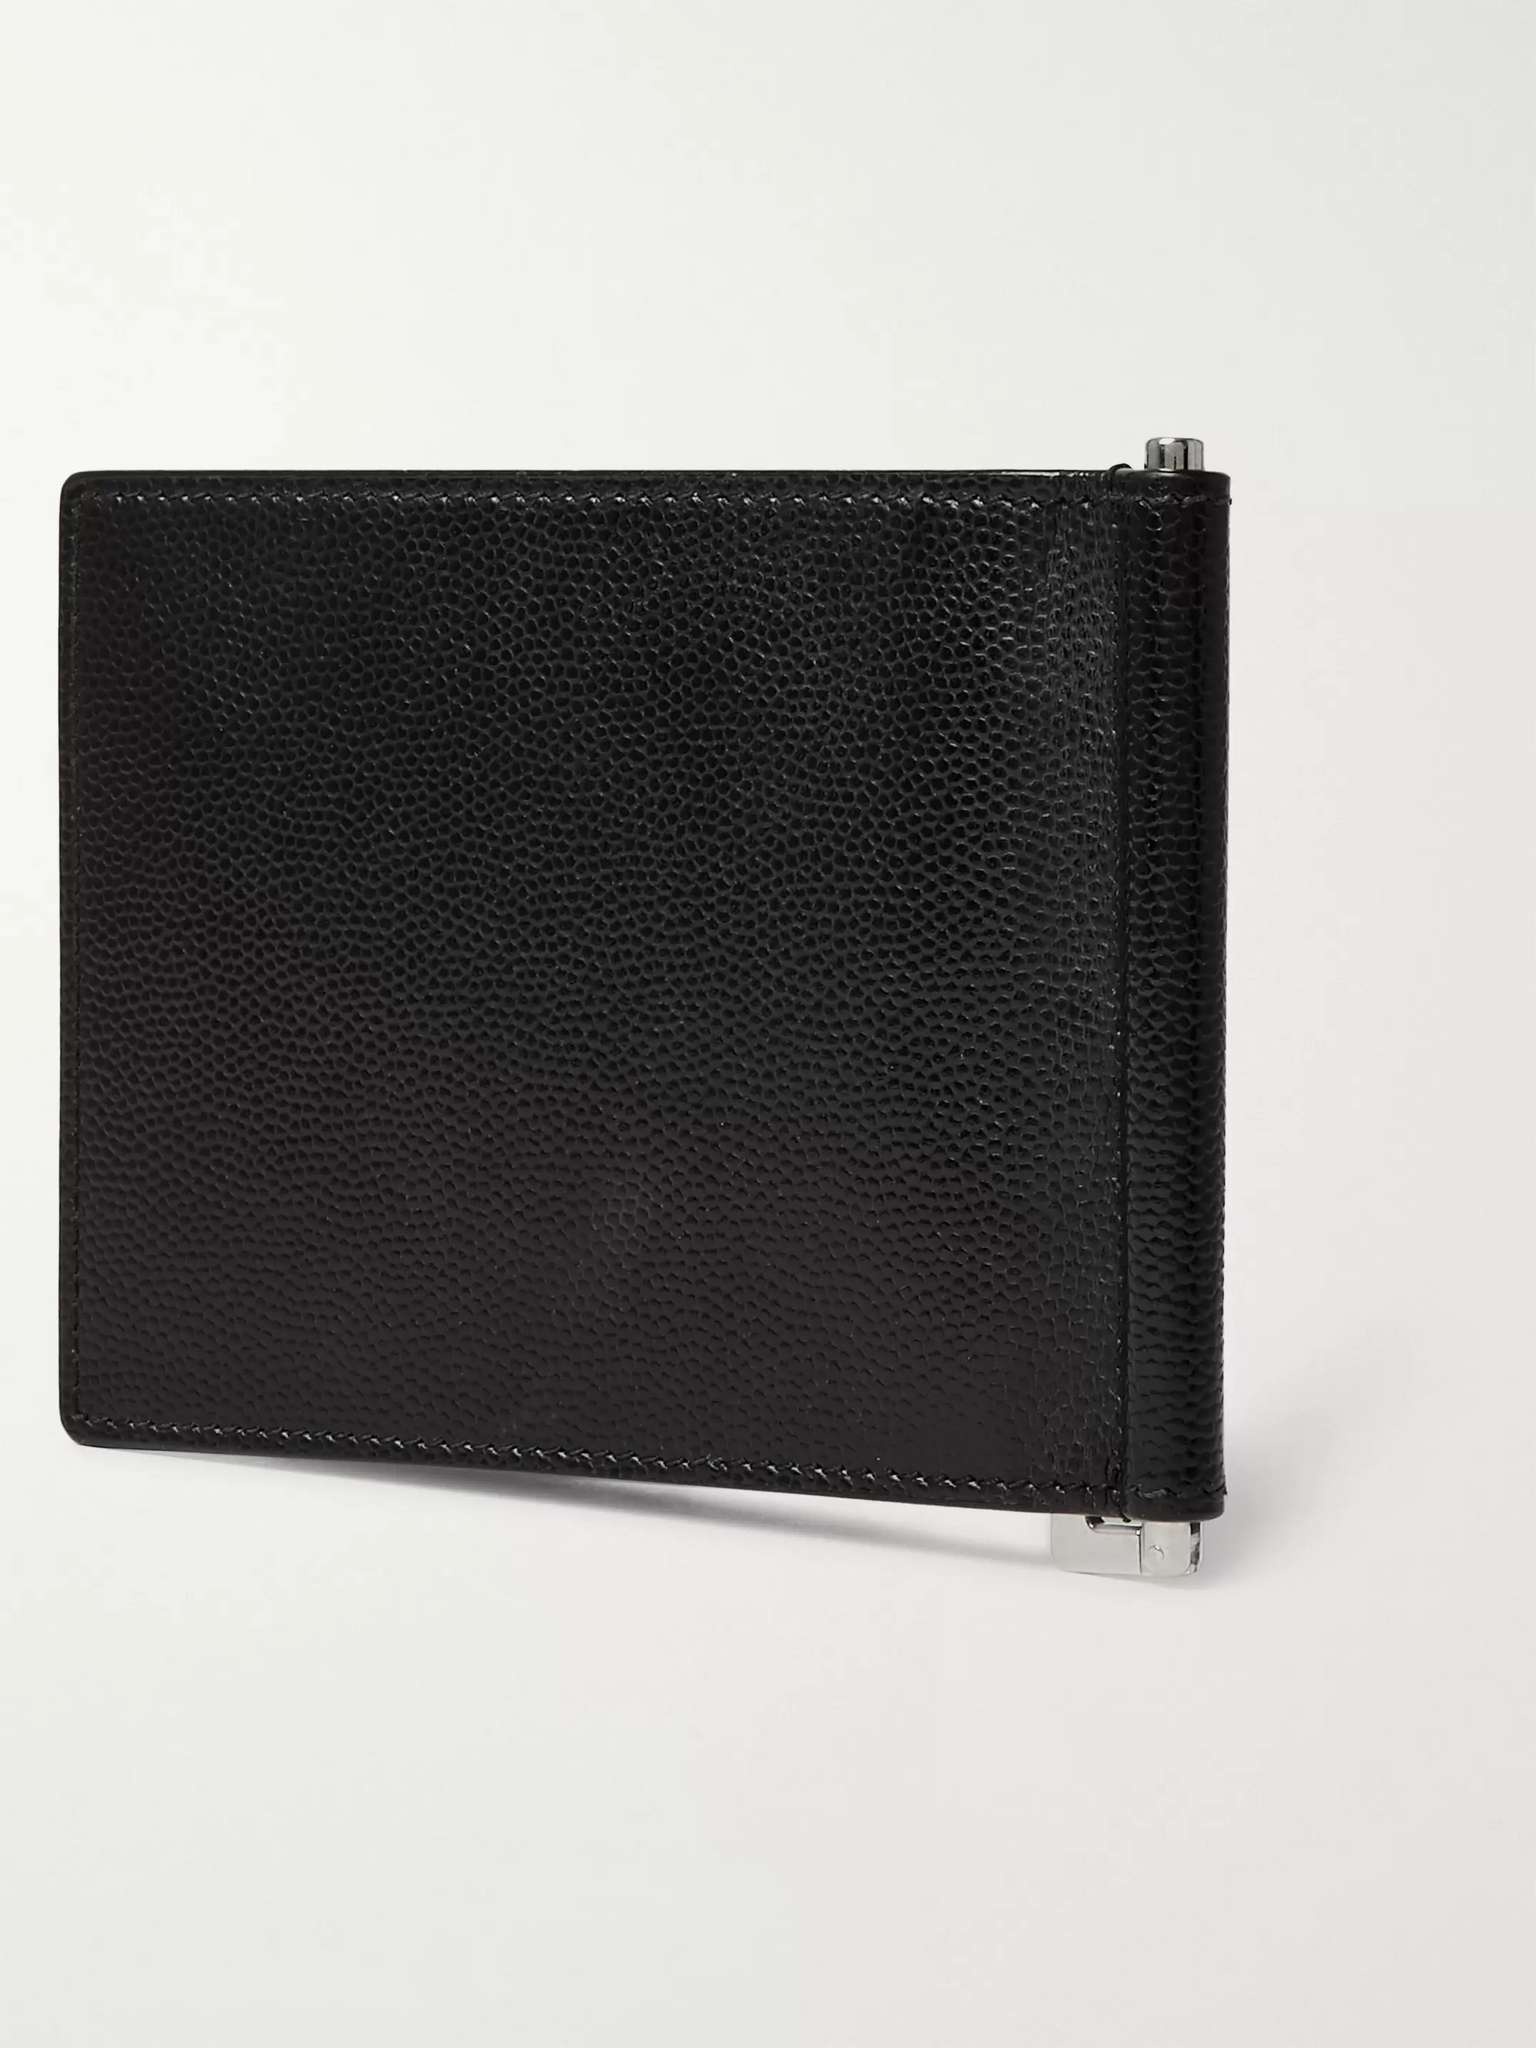 Pebble-Grain Leather Billfold Wallet with Money Clip - 3